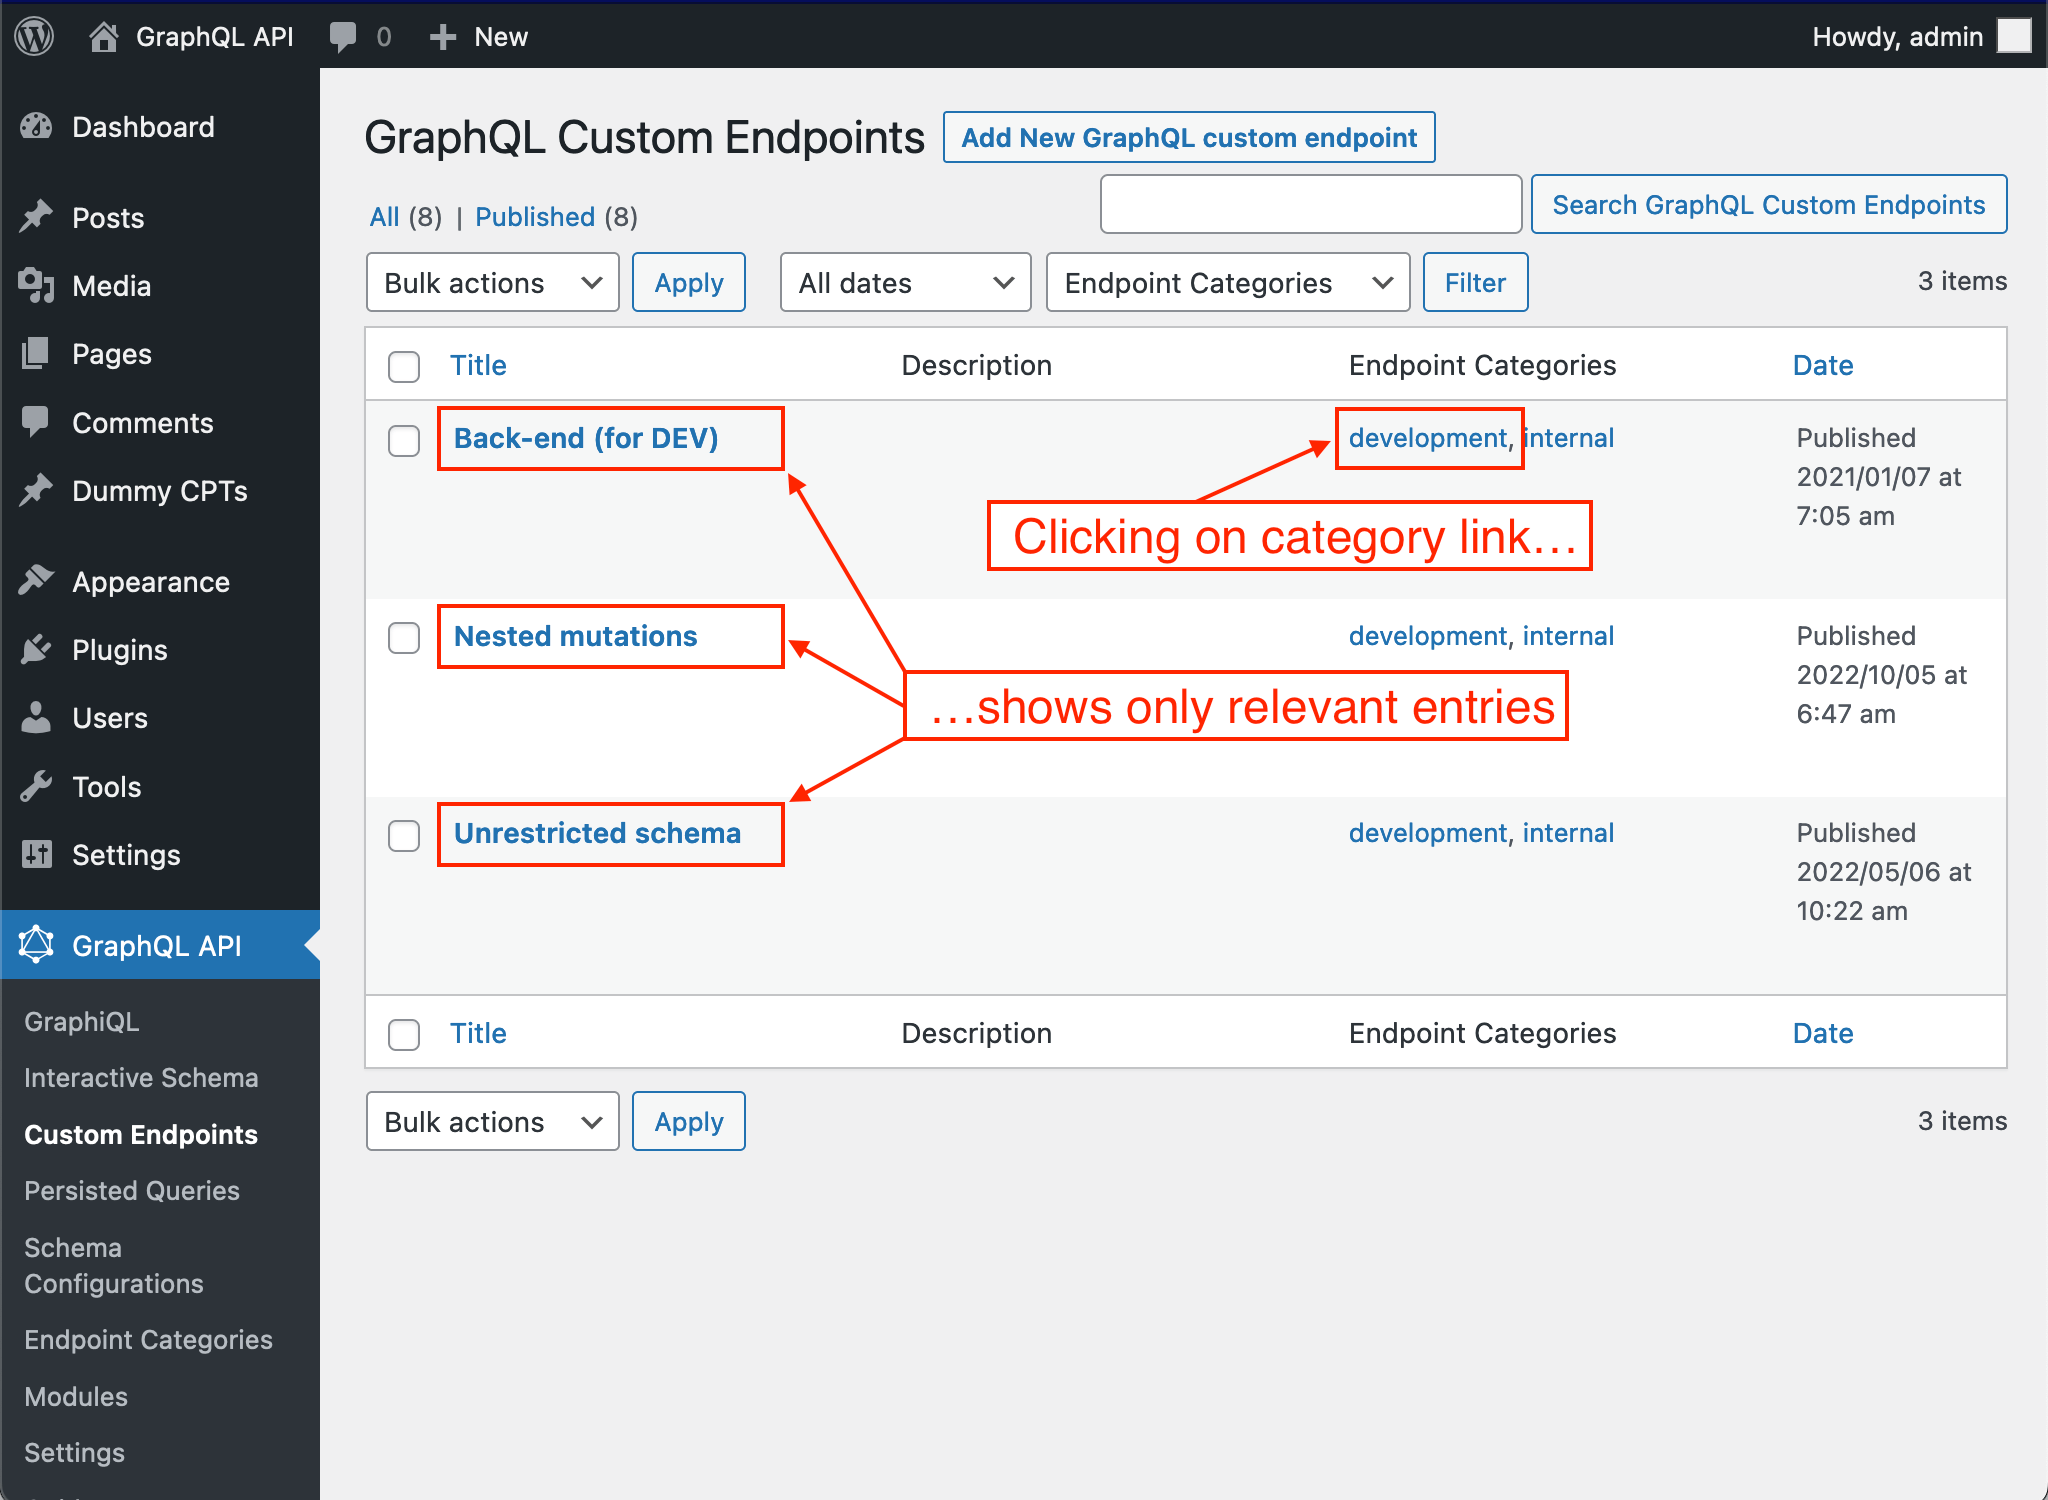 Filtering Custom Endpoints by category